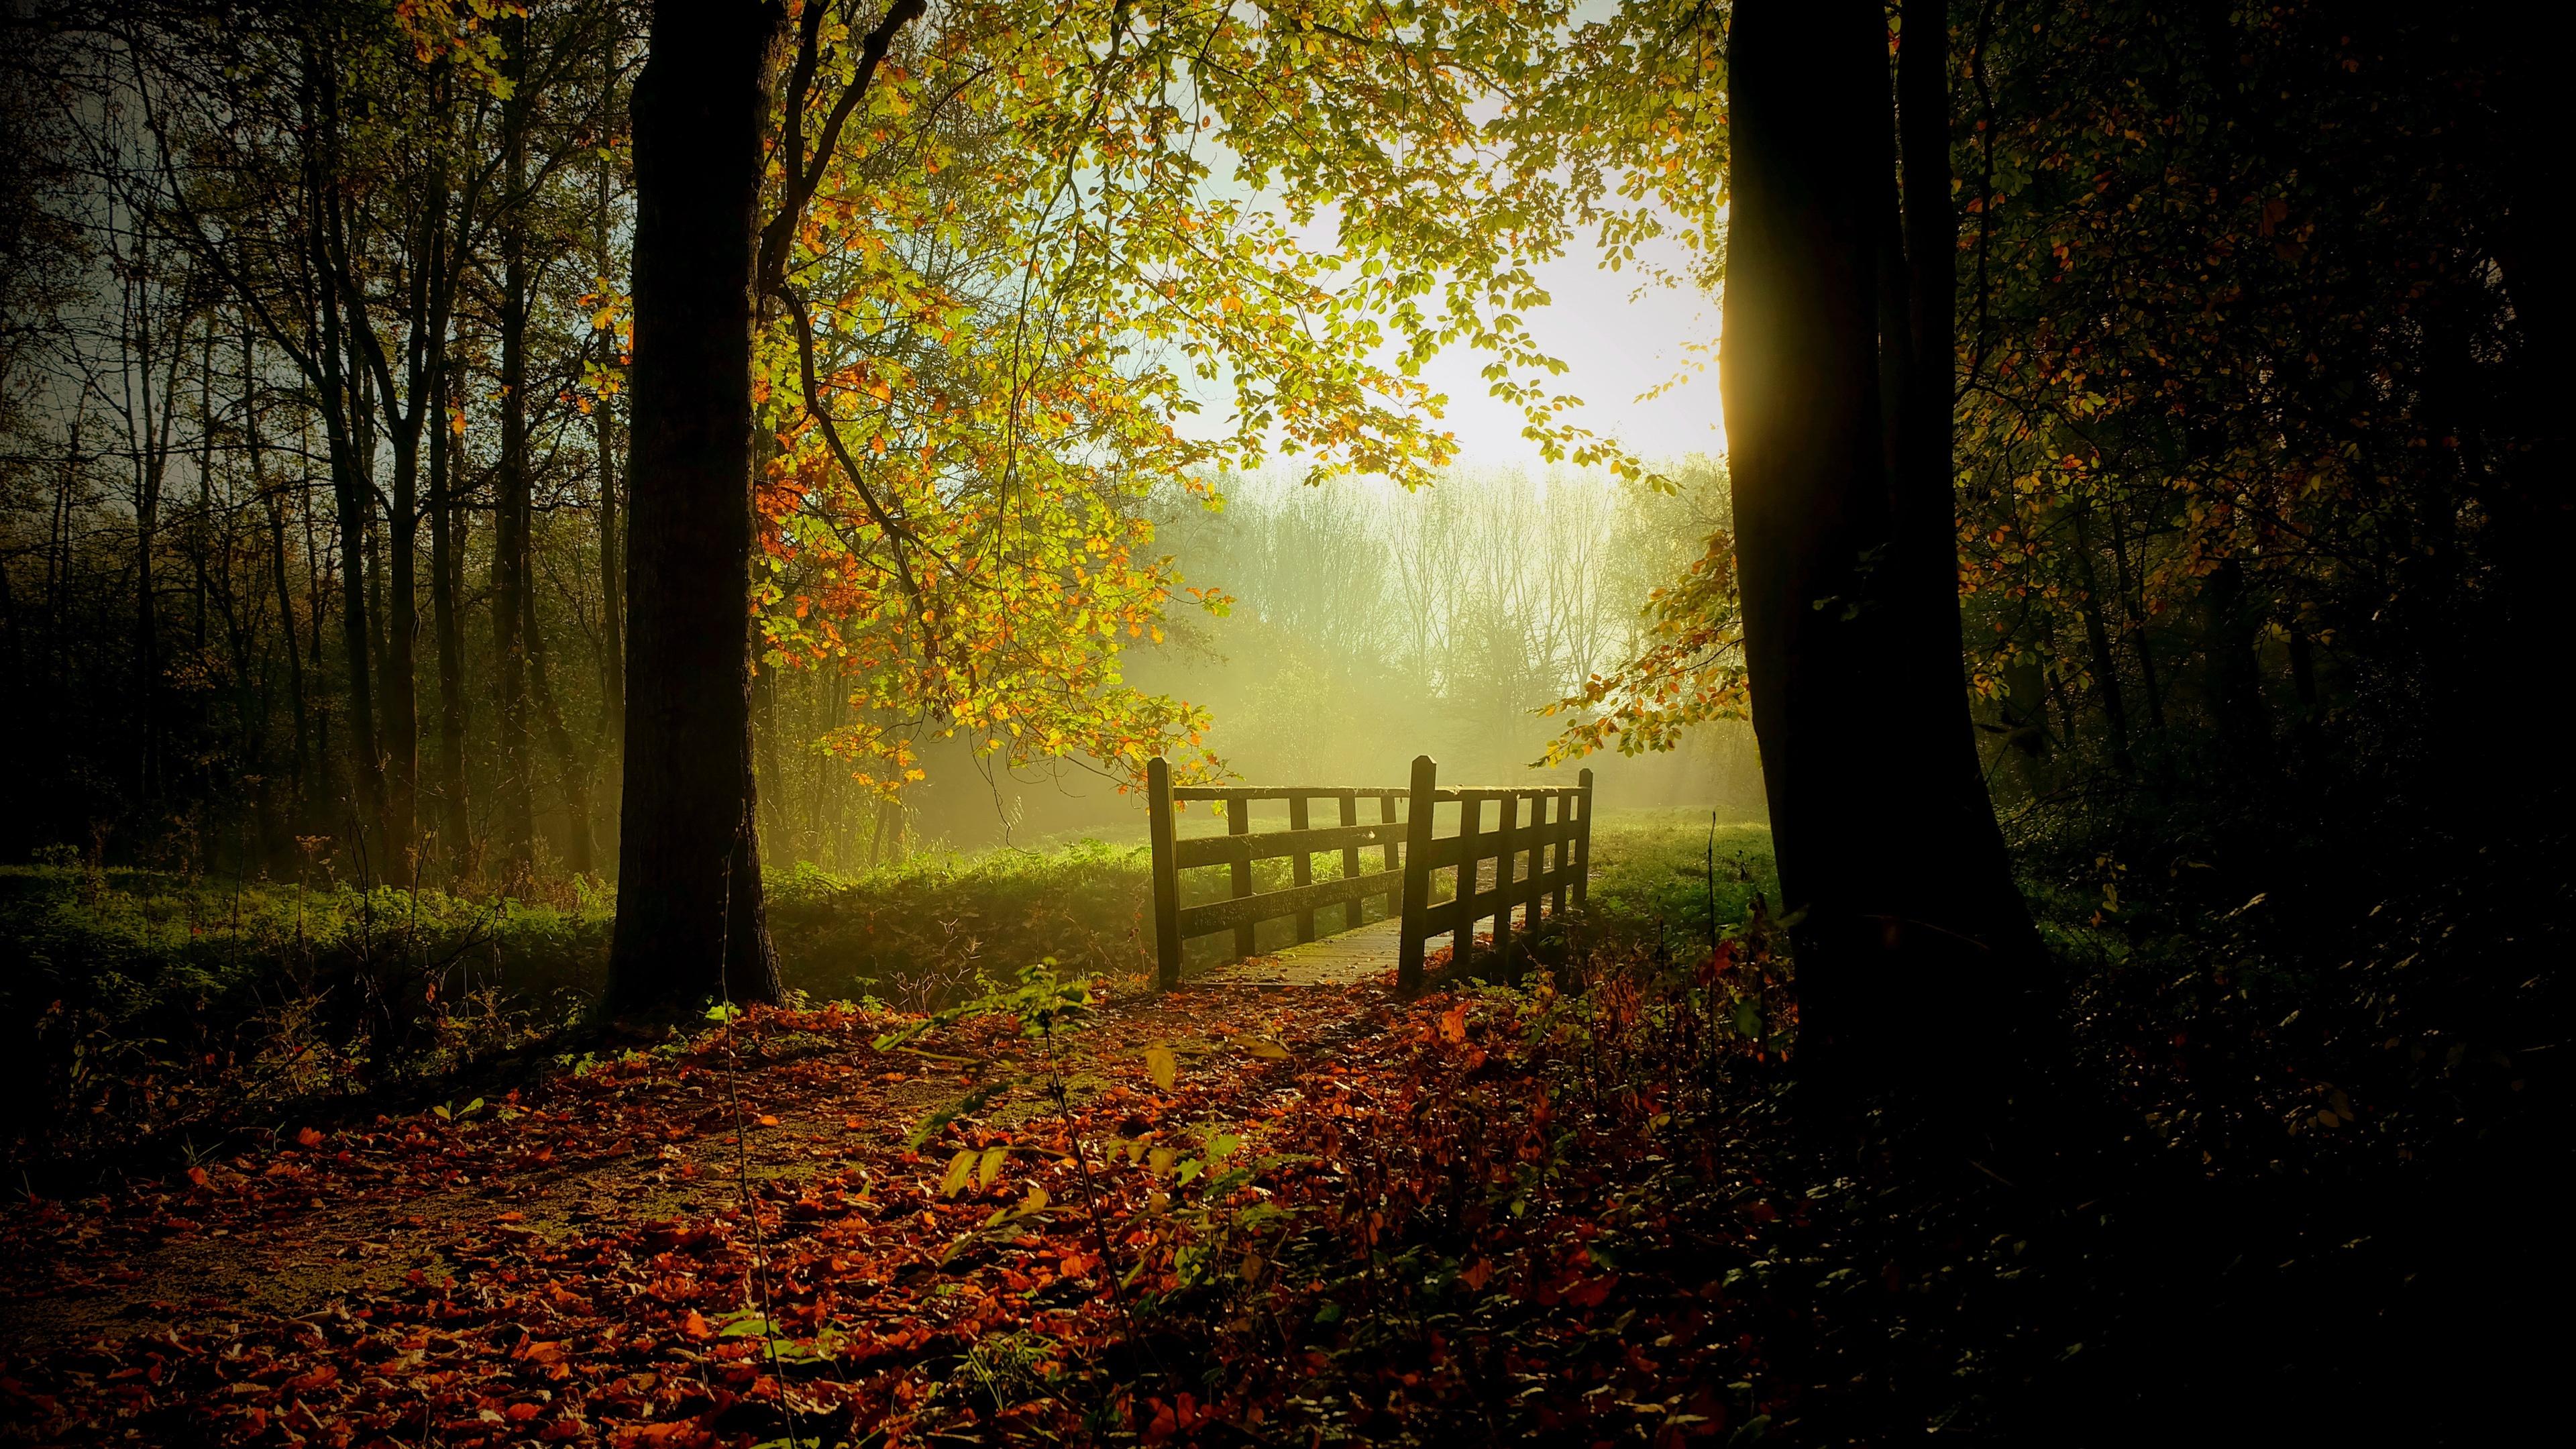 Sunny Fall Day Wallpaper in jpg format for free download